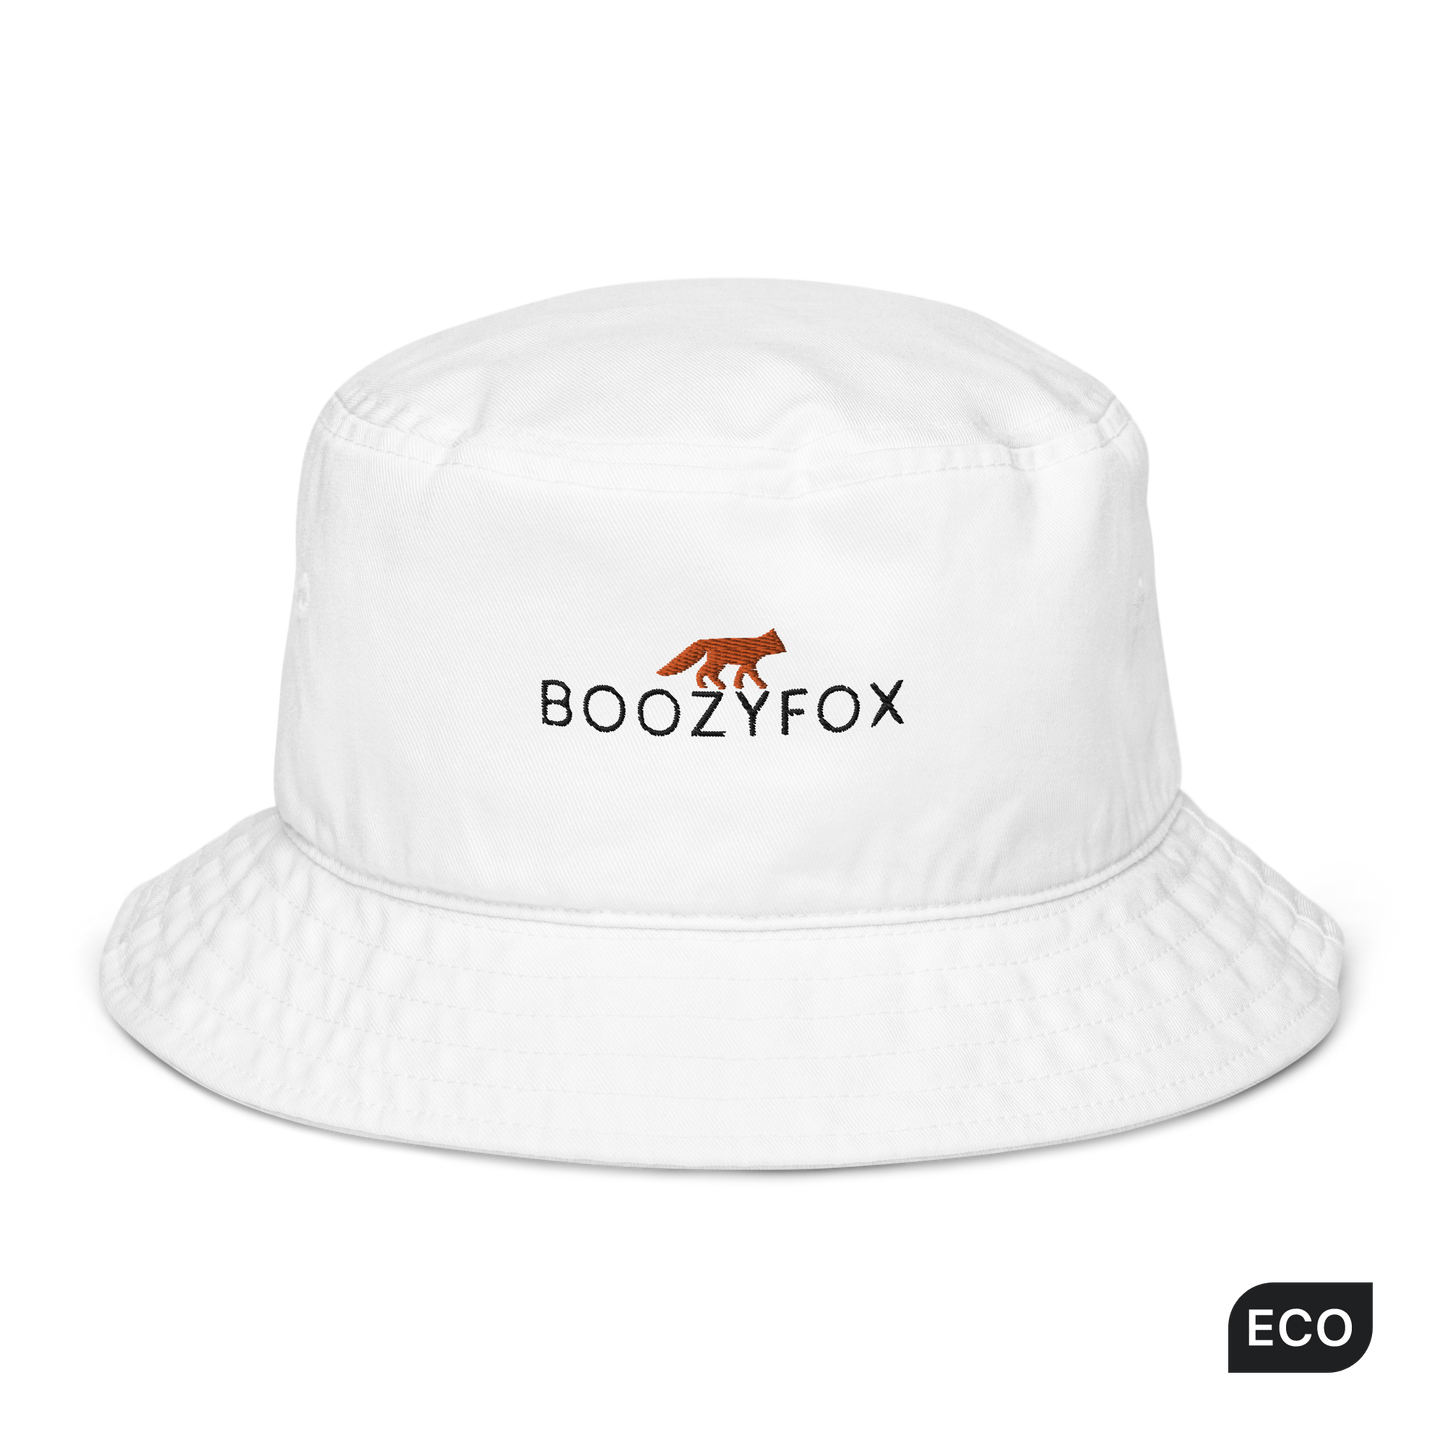 White Organic Bucket Hat featuring a recognizable Boozy Fox embroidery logo on the front - Bucket Hats - Boozy Fox